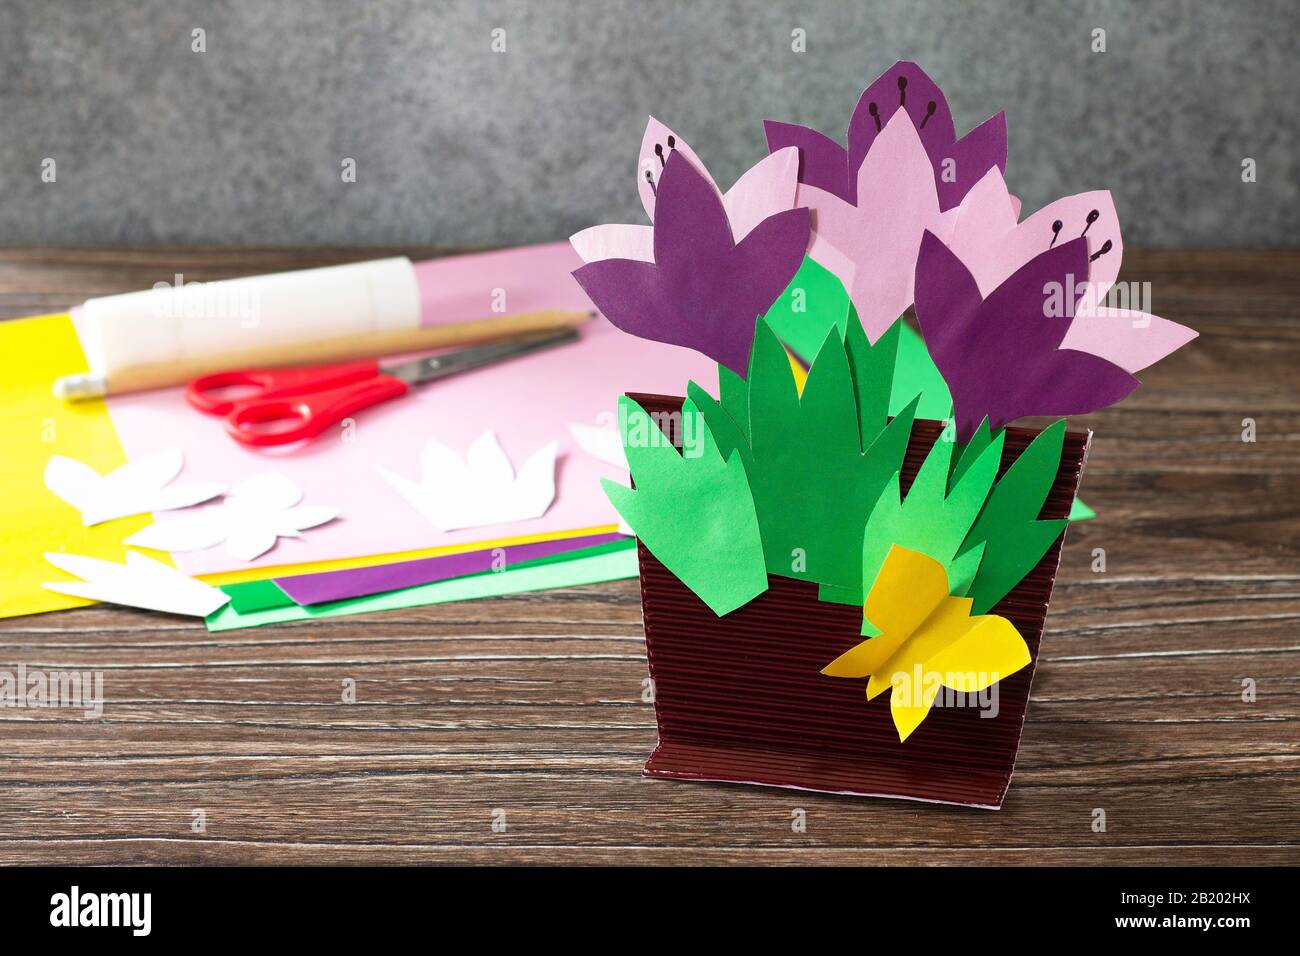 Creative Projects, Crafts, and Recipes Using Flowers - Green in Real Life